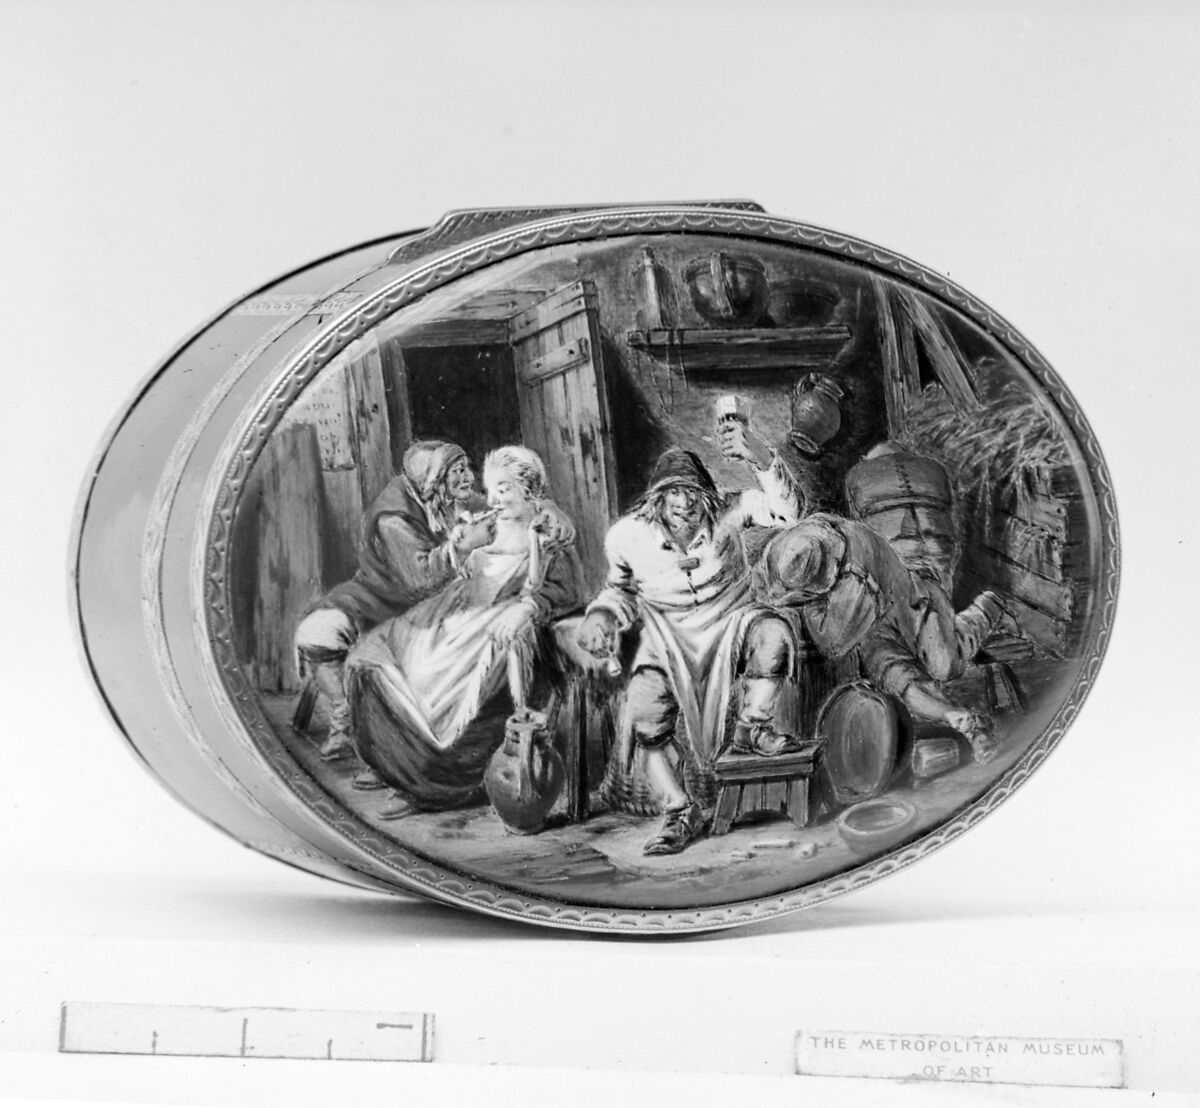 Snuffbox with genre scene, Possibly by Jean-Lambert Payen (master 1746–72), Gold, enamel, French, Paris 